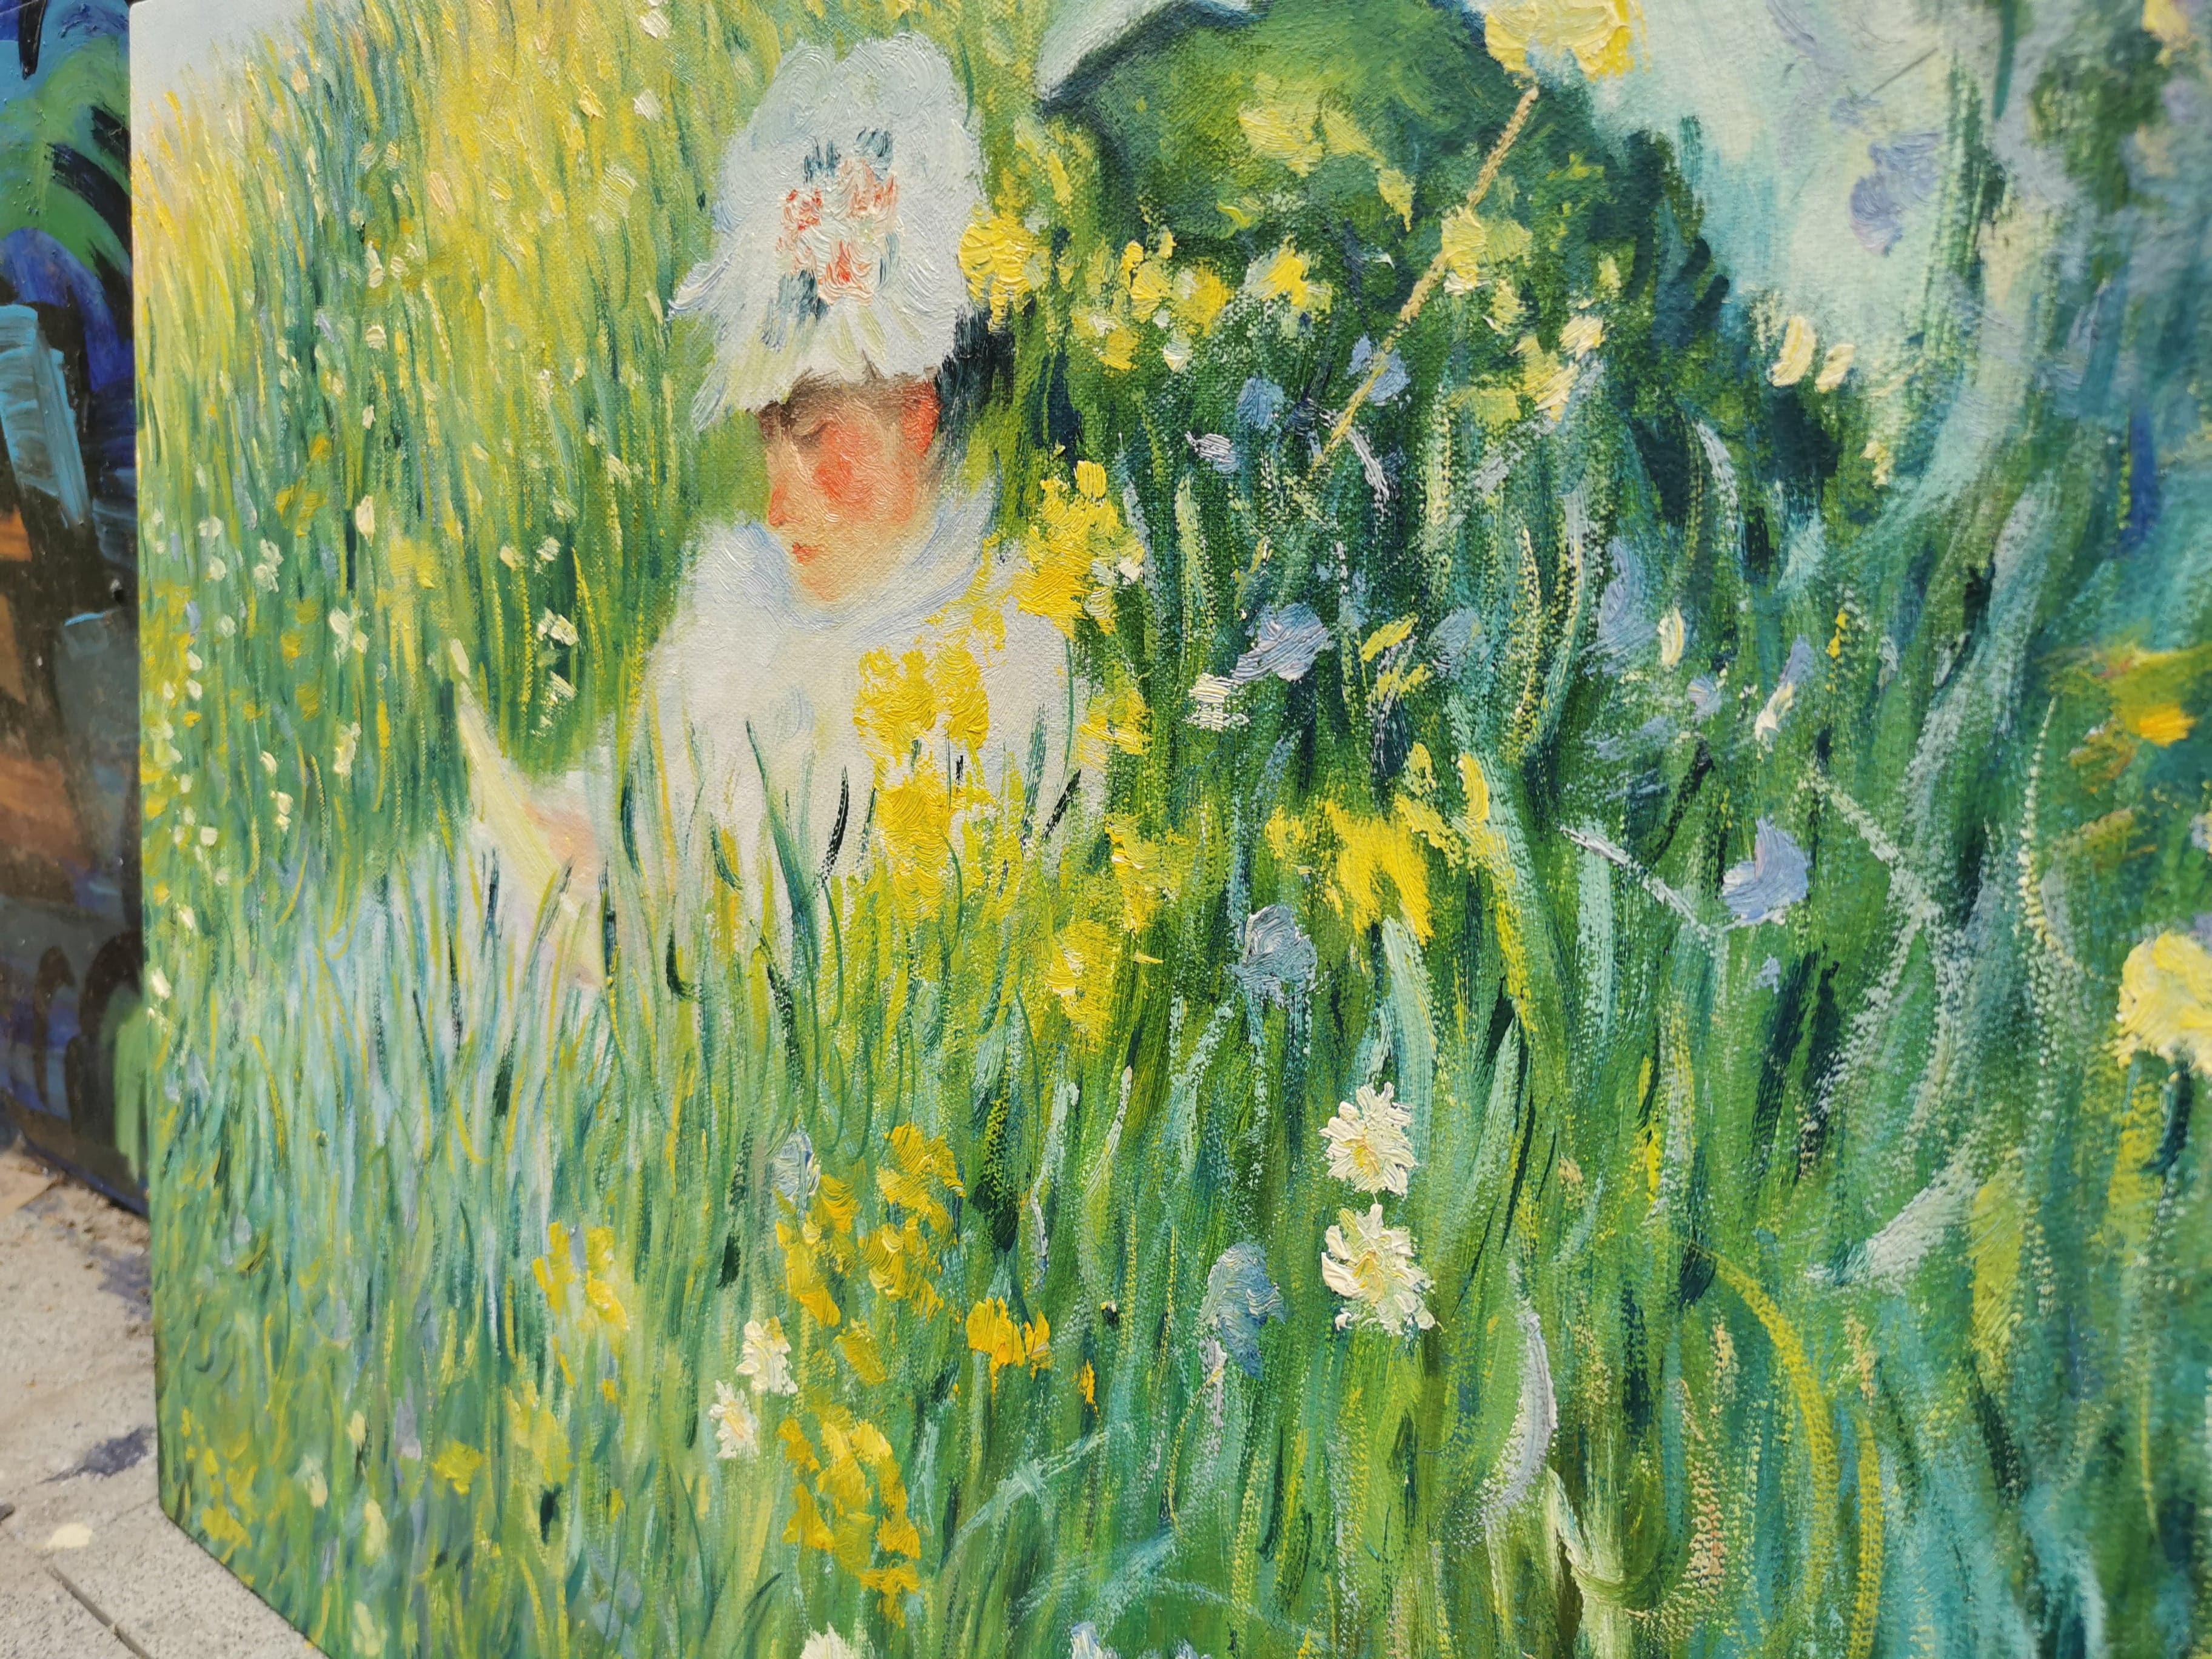 Framed 1 Panel - Oil Painting - In the Meadow (Oscar-Claude Monet)